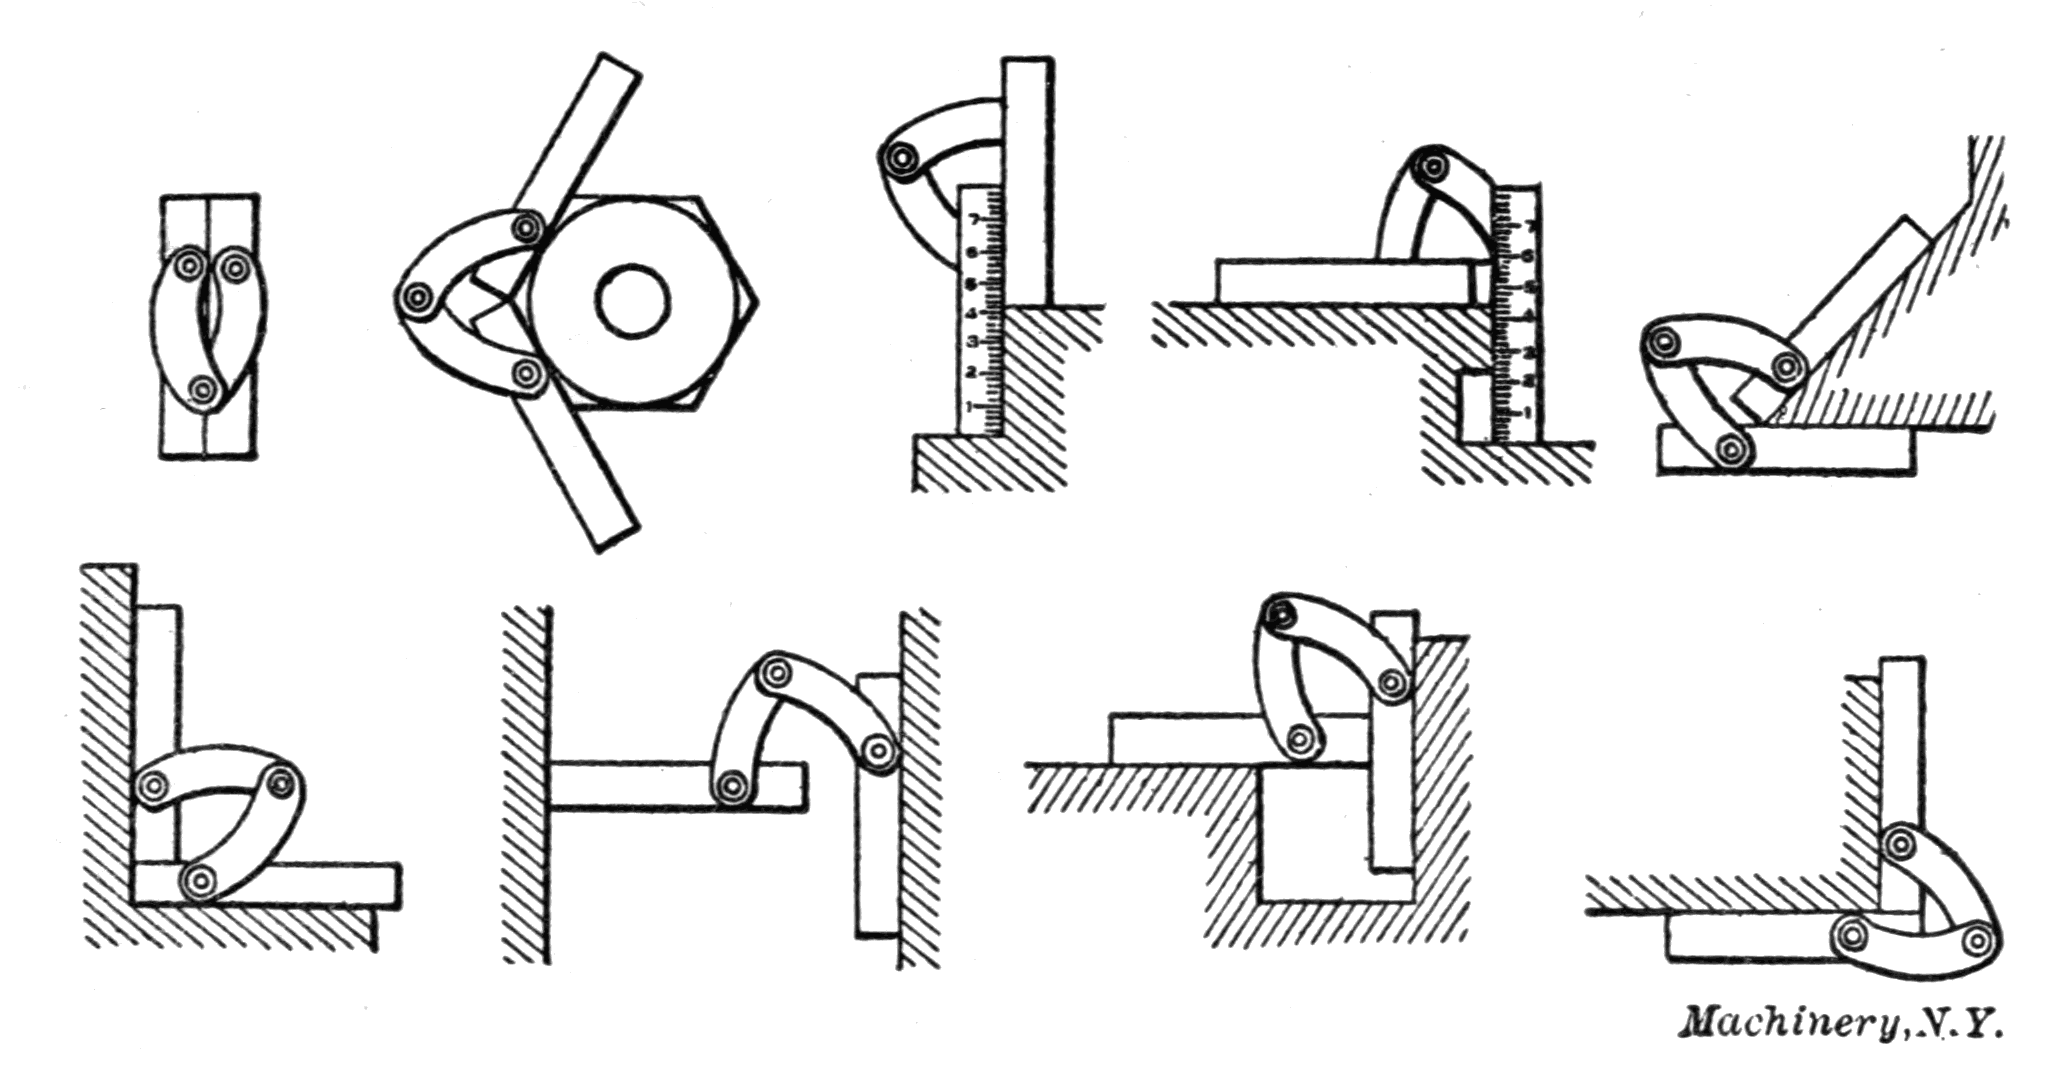 Fig. 57. Special Tool for Measuring Angles